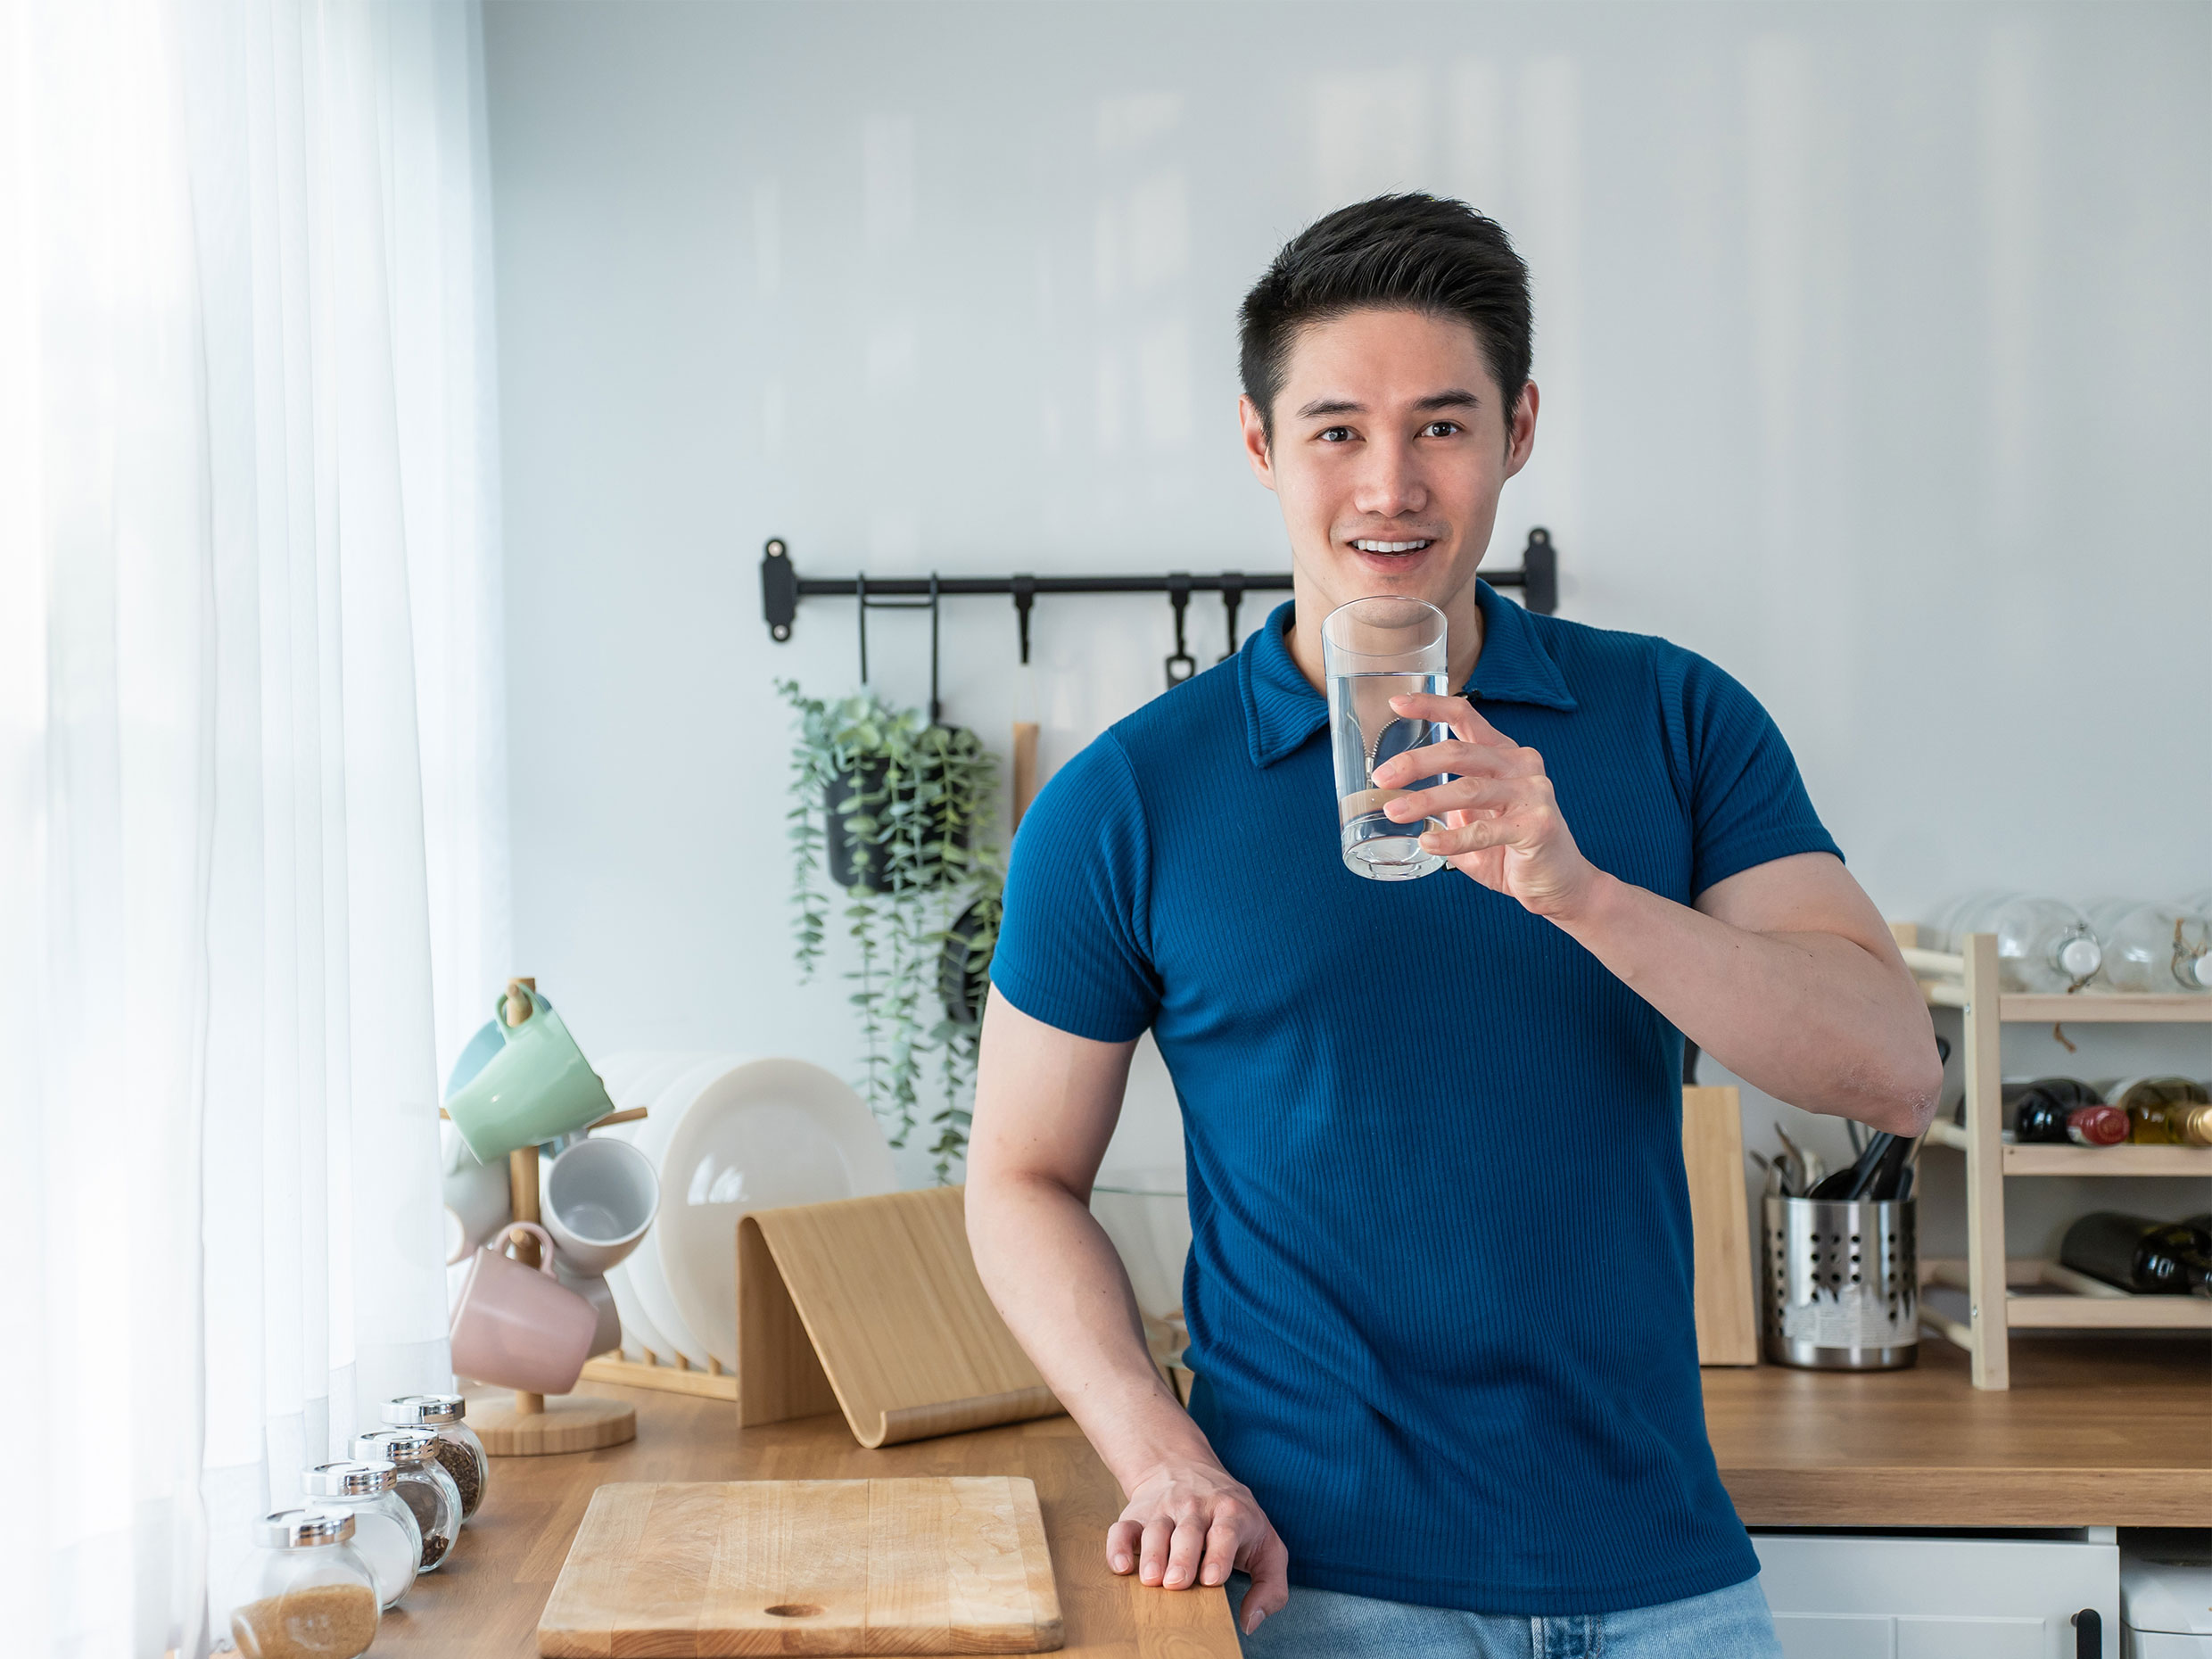 man in the kitchen confidently looking at camera with a glass of water.